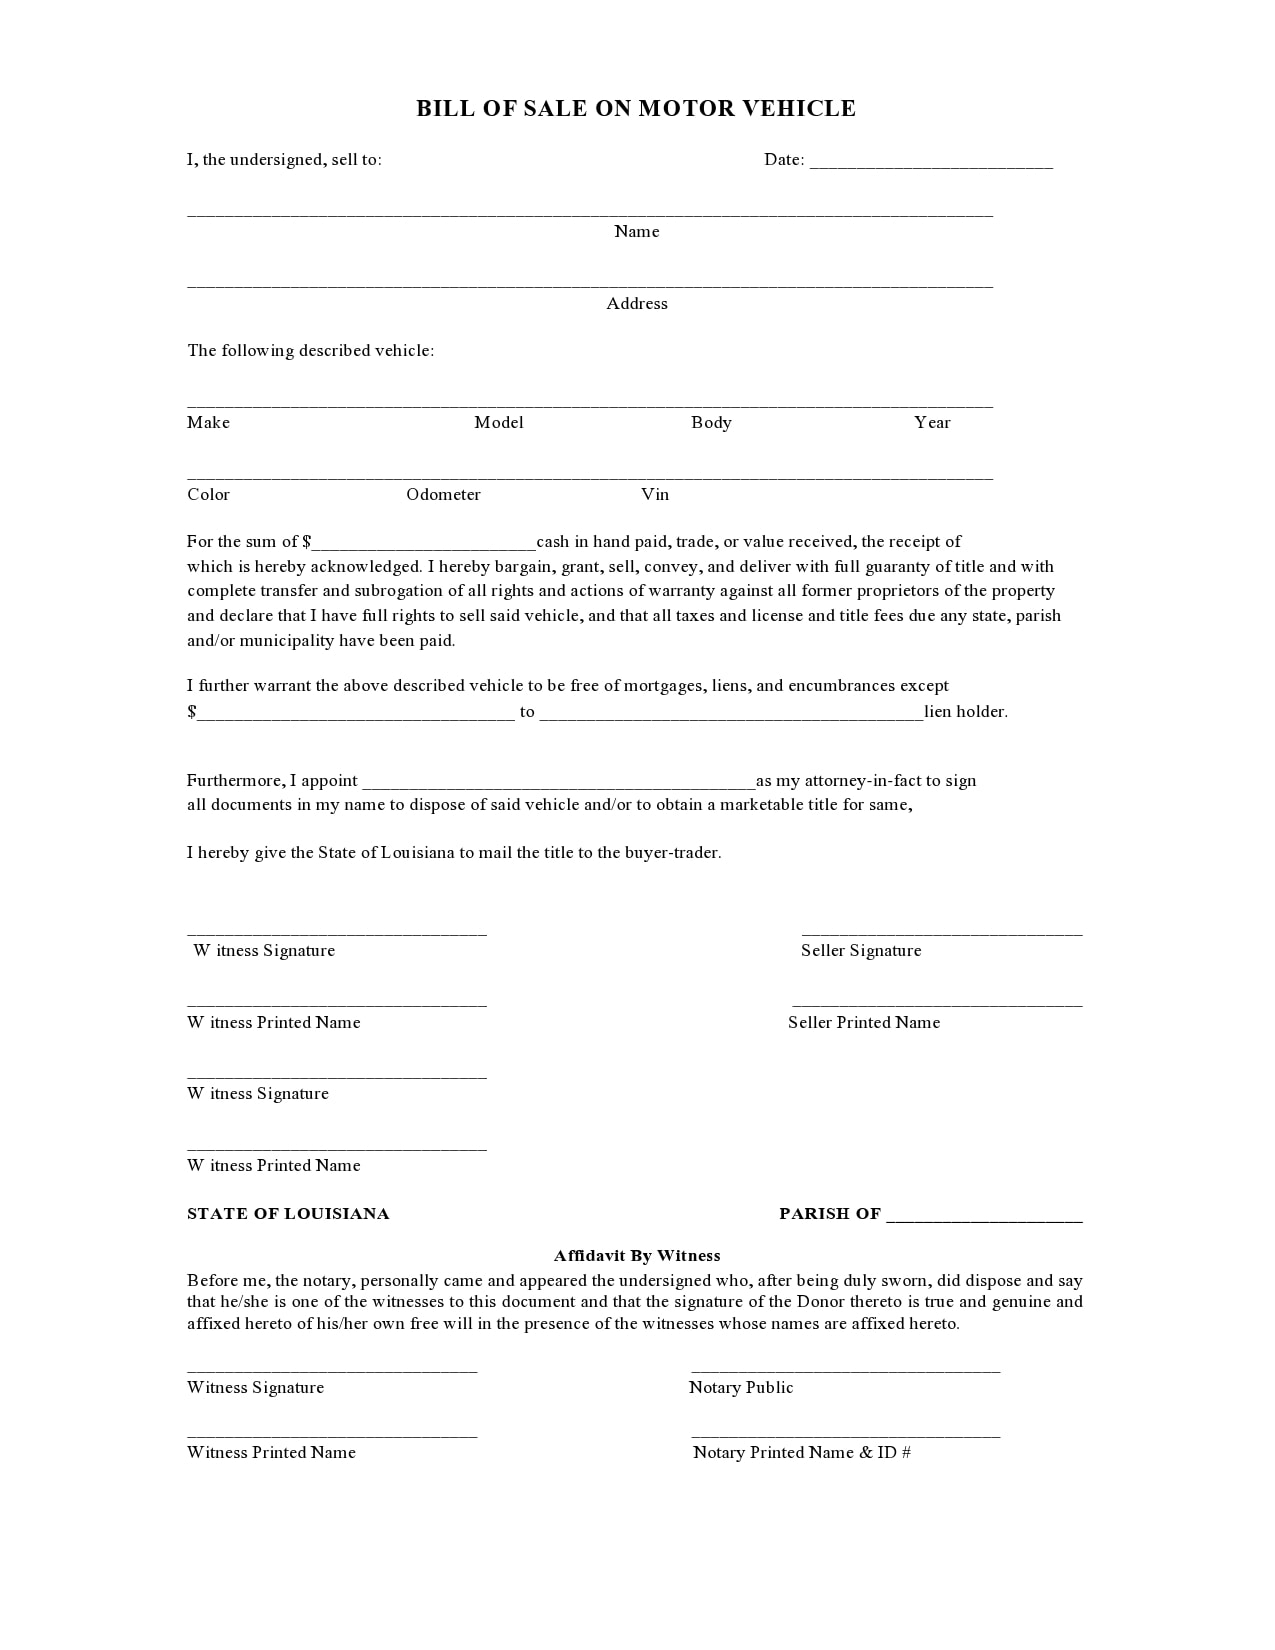 download-free-motorcycle-bill-of-sale-form-form-download